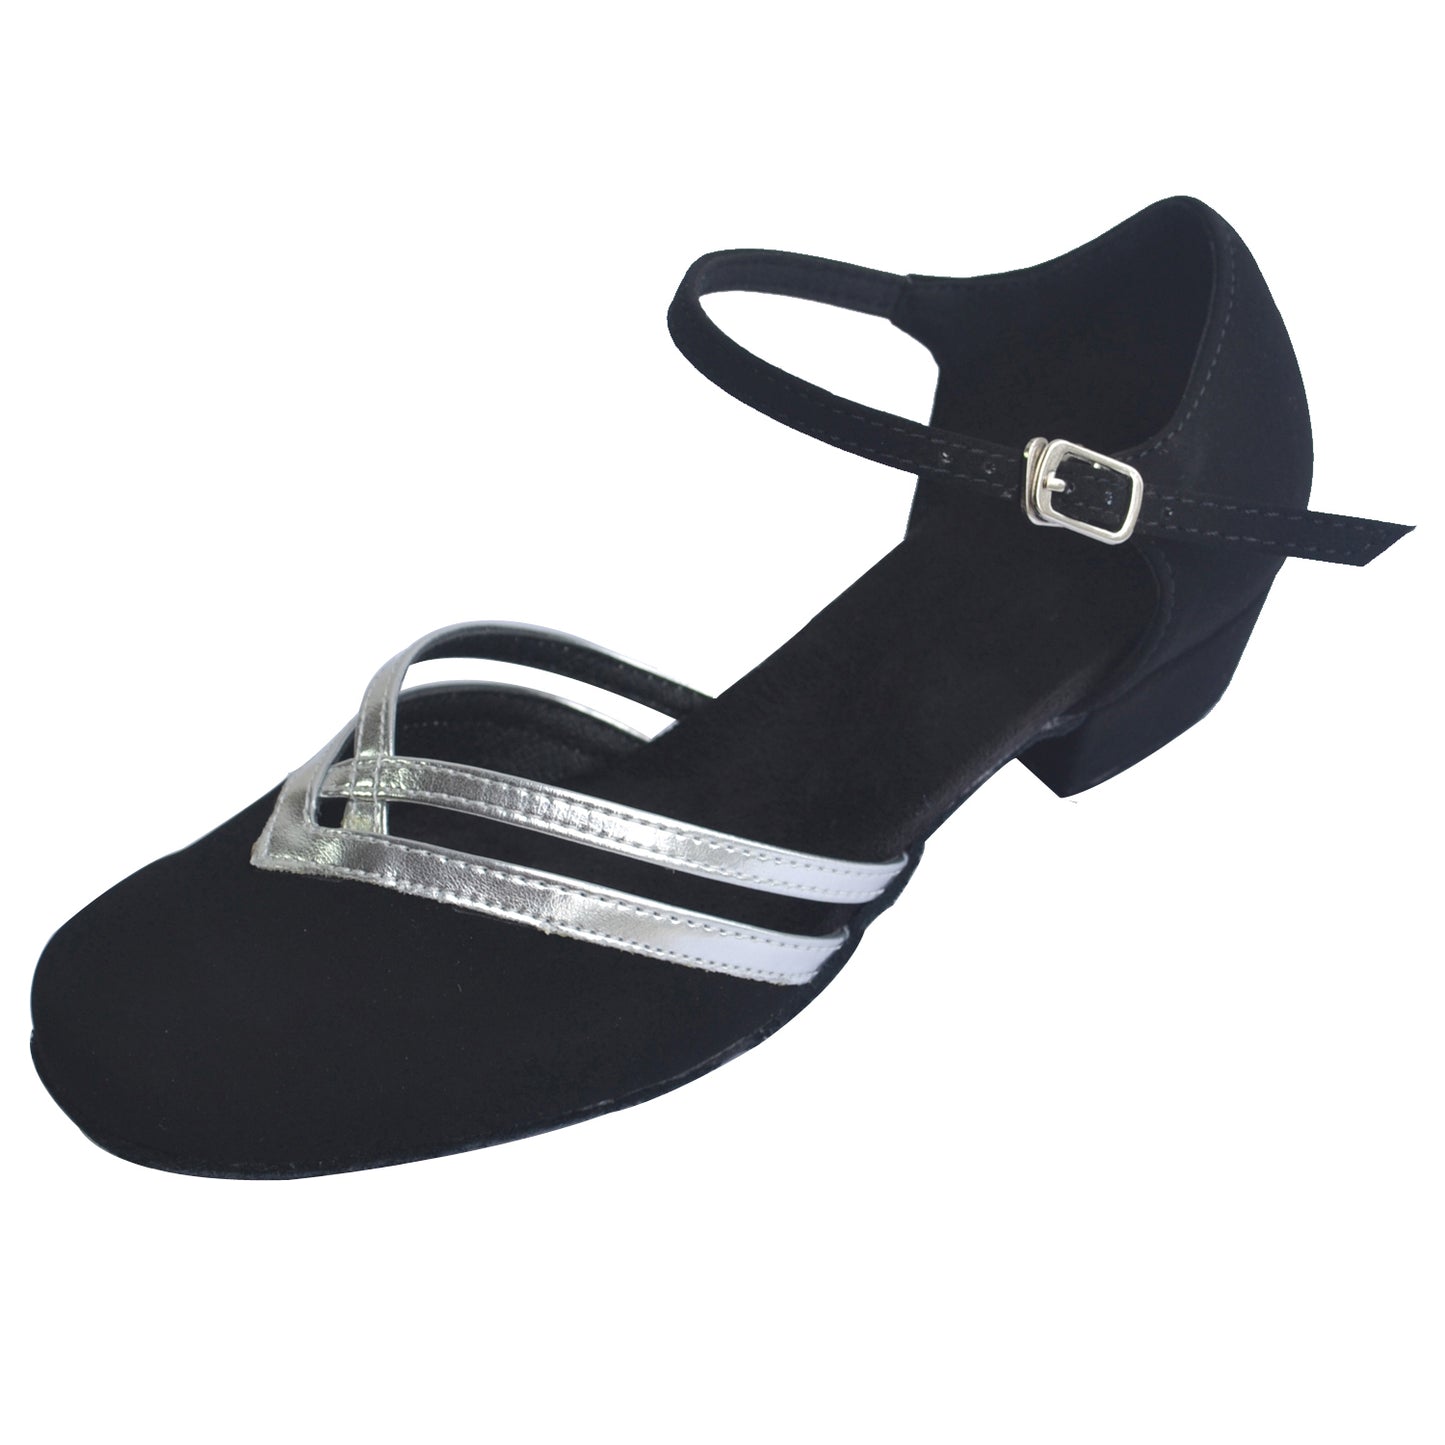 Women Ballroom Dancing Shoes Ladies Tango Latin Practice Dance Shoe Suede Sole Buckle-up Closed-toe Black and Silver (PD8881B)